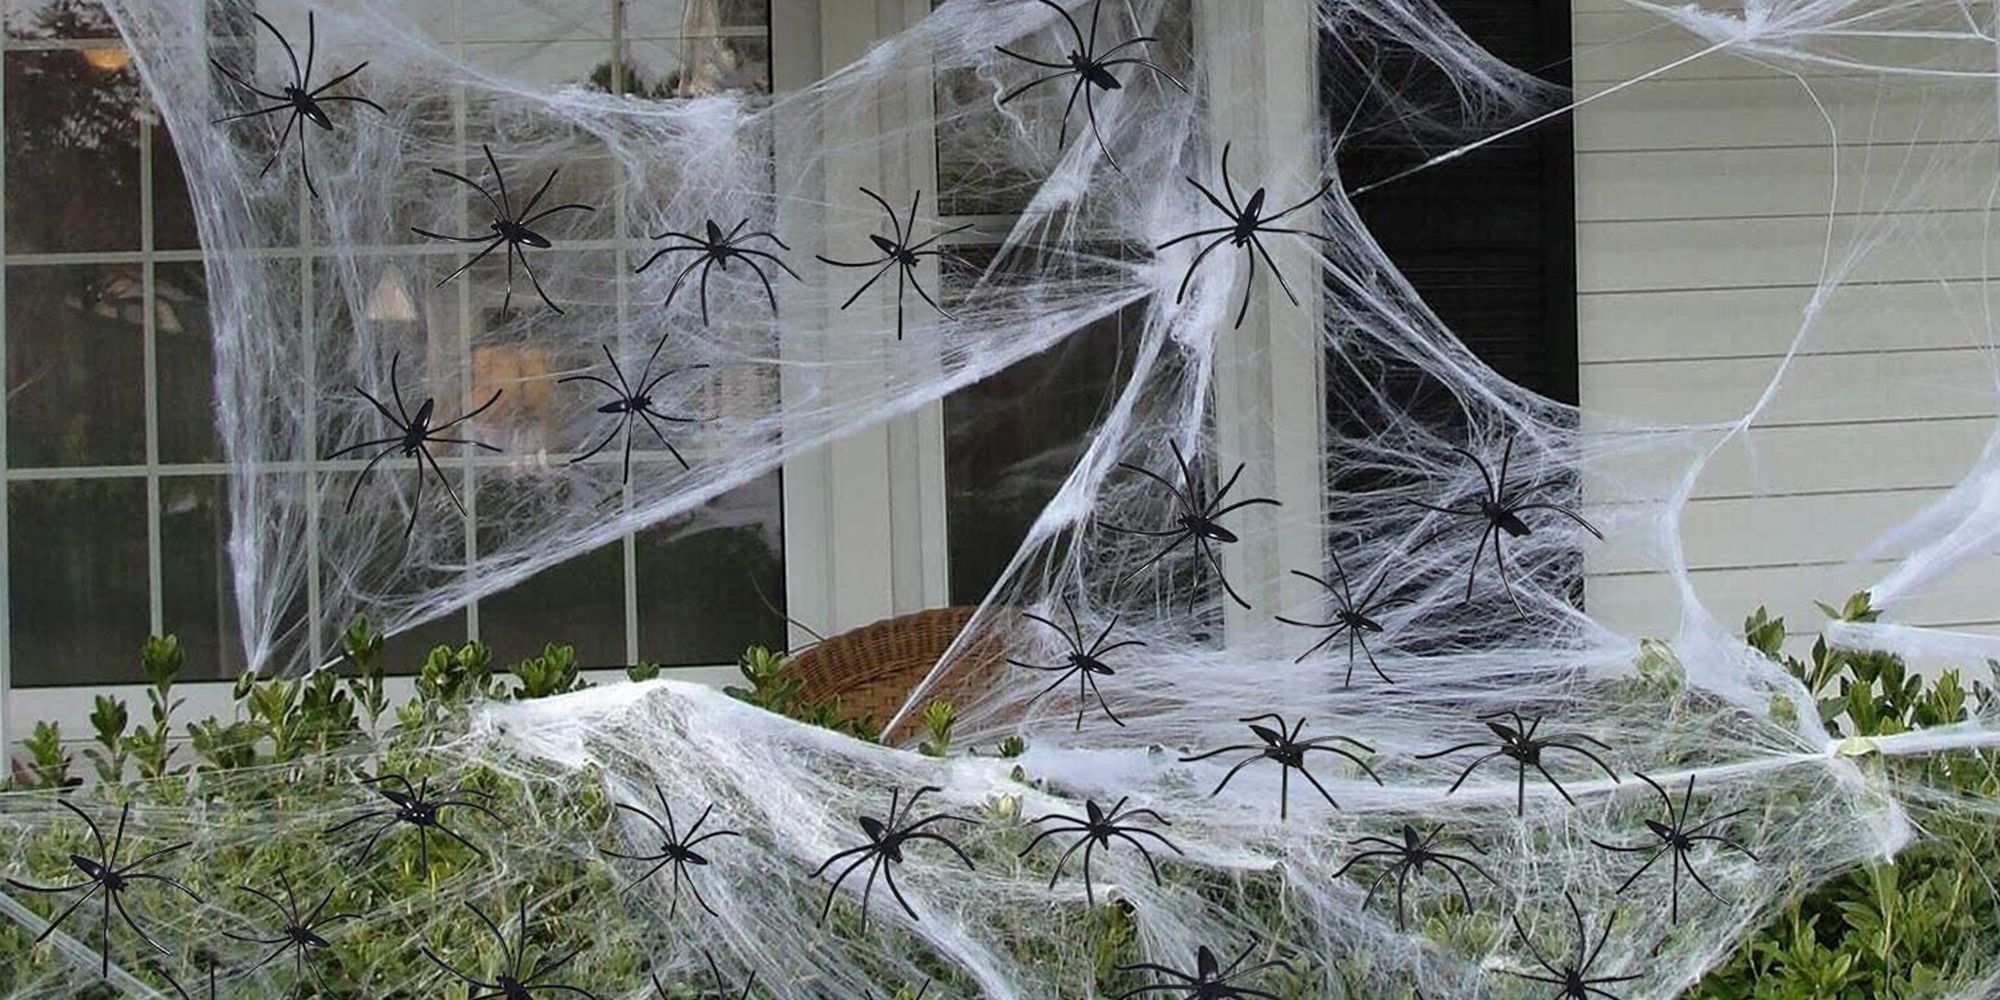 How to Decorate With Spider Webs